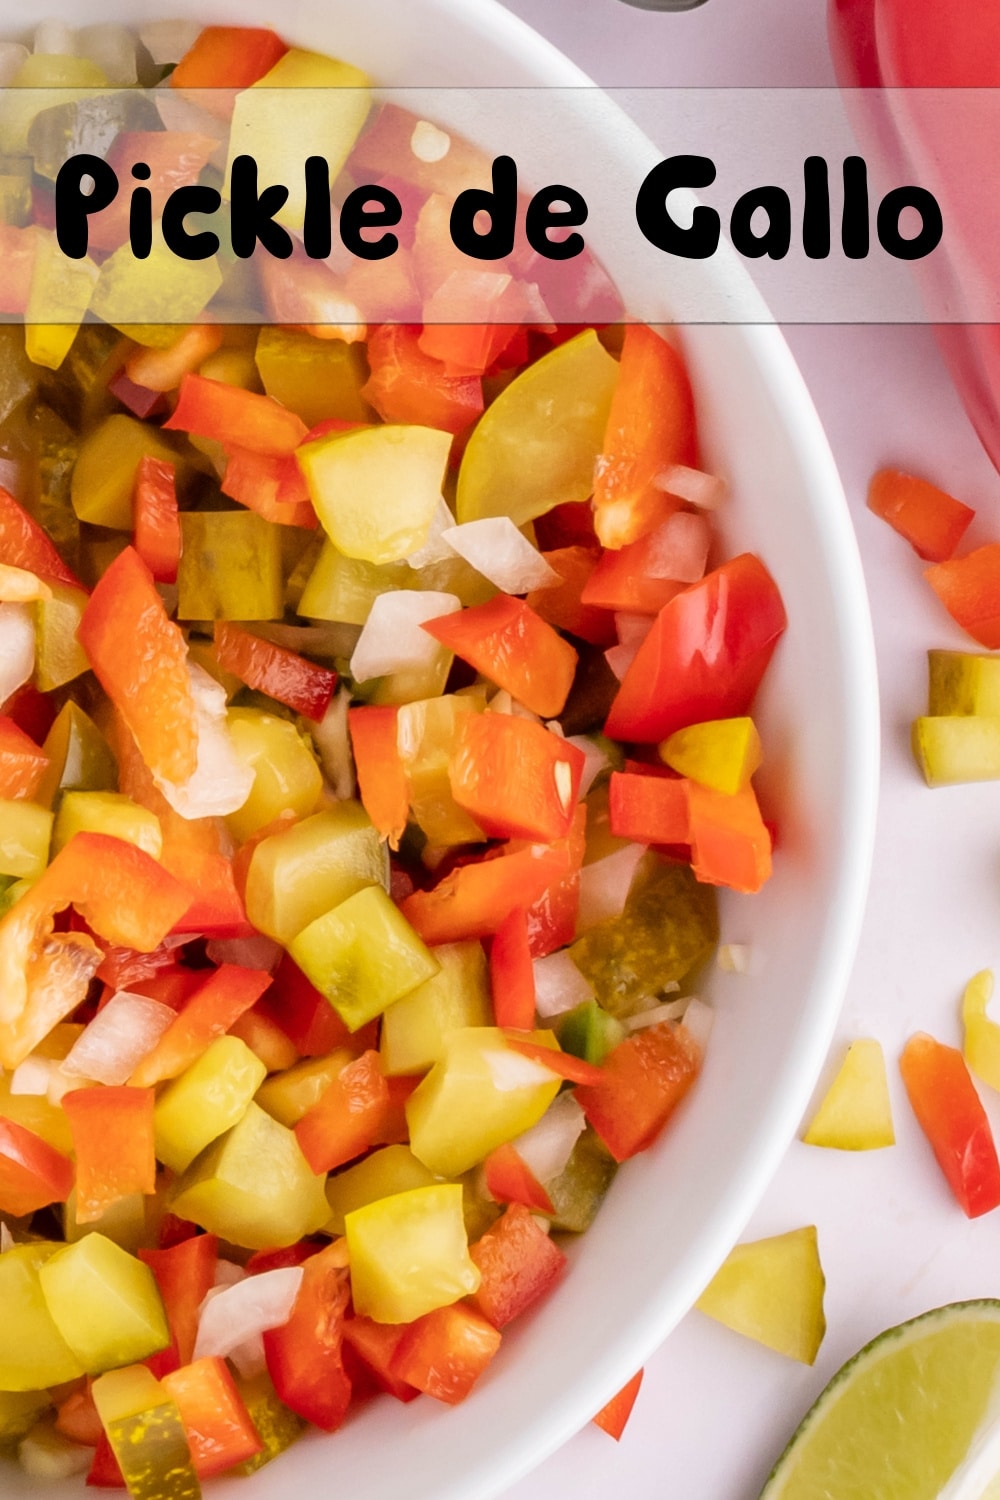 Add a tangy twist to your salsa game with our irresistible Dill Pickle Salsa recipe! This pickle de gallo is bursting with flavor and perfect for snacking. When it comes to pickle recipes and pickle snack ideas, this is it! via @cmpollak1